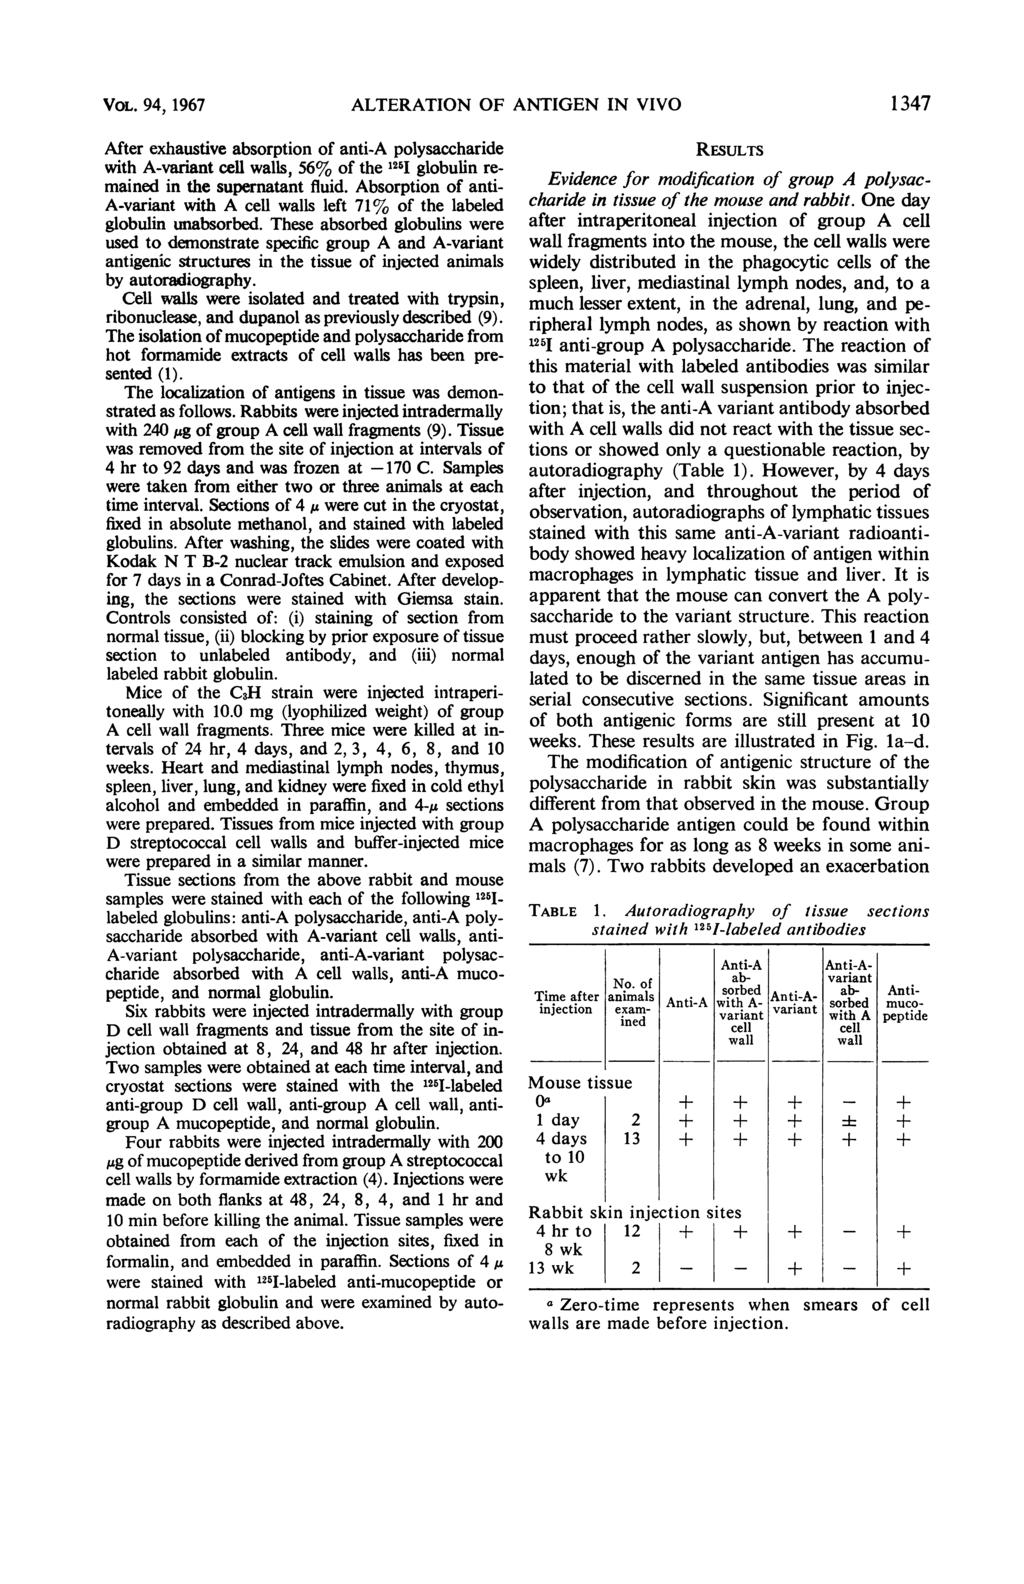 VOL. 94, 1967 After exhaustive absorption of anti-a polysaccharide with A-variant s, 56% of the 125j globulin remained in the supernatant fluid.